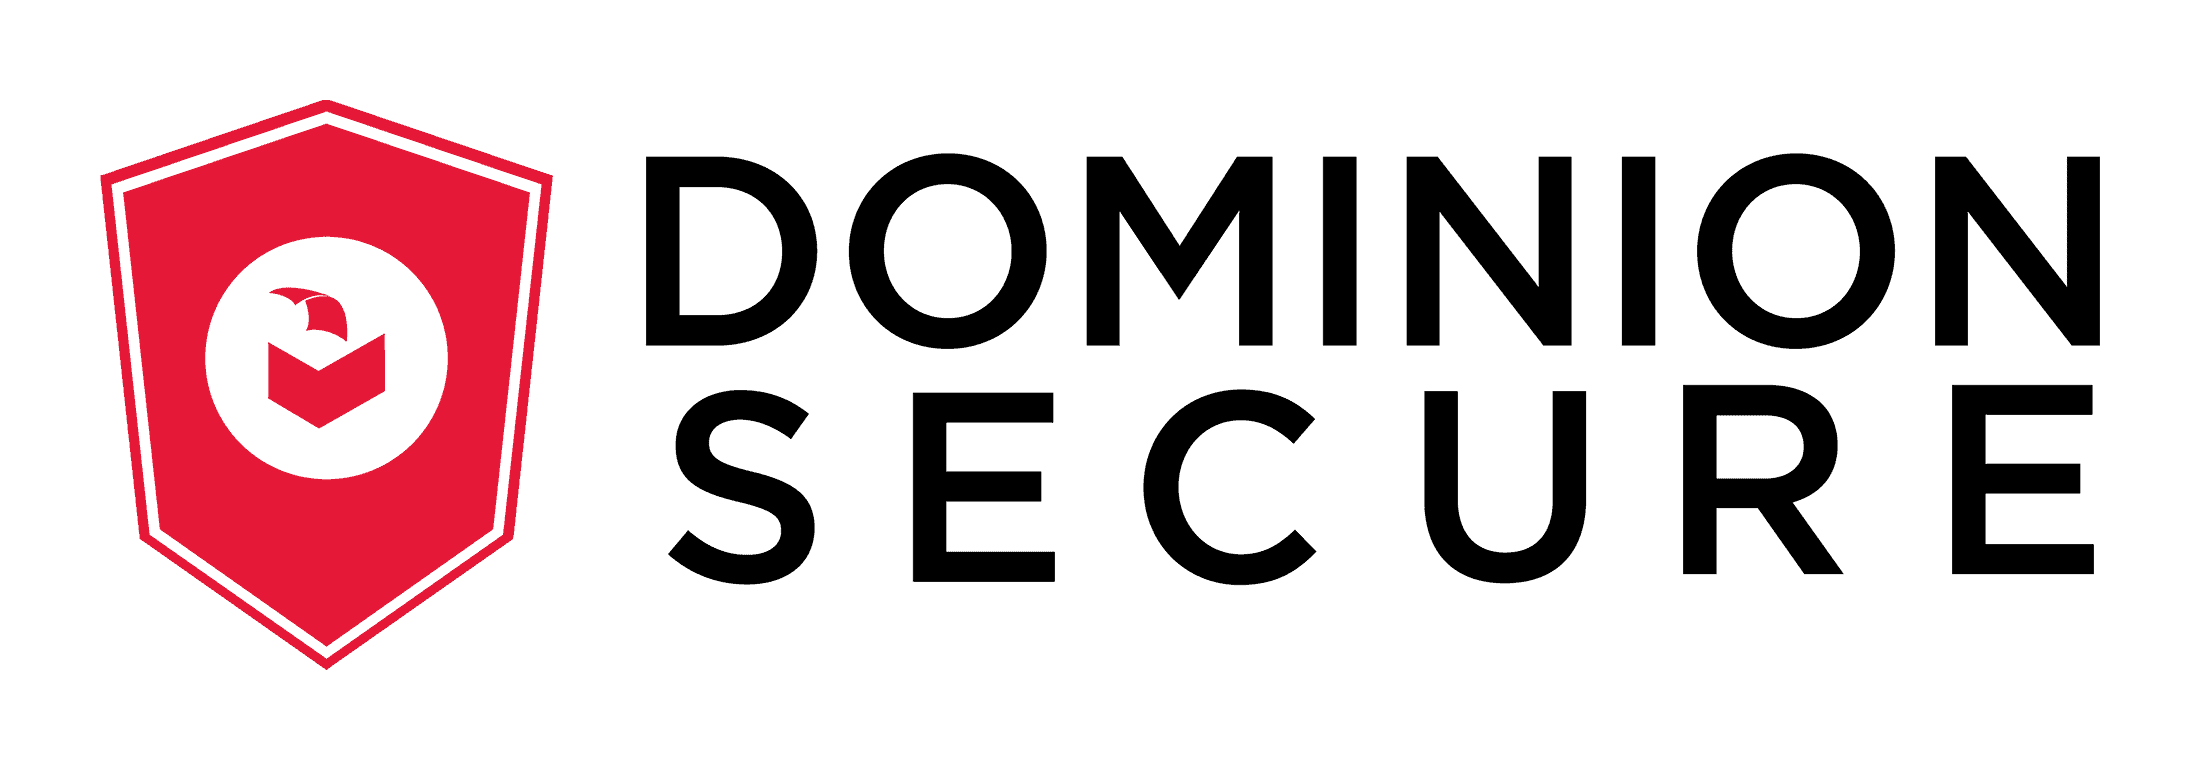 Dominion Secure - Dominion Voting Systems